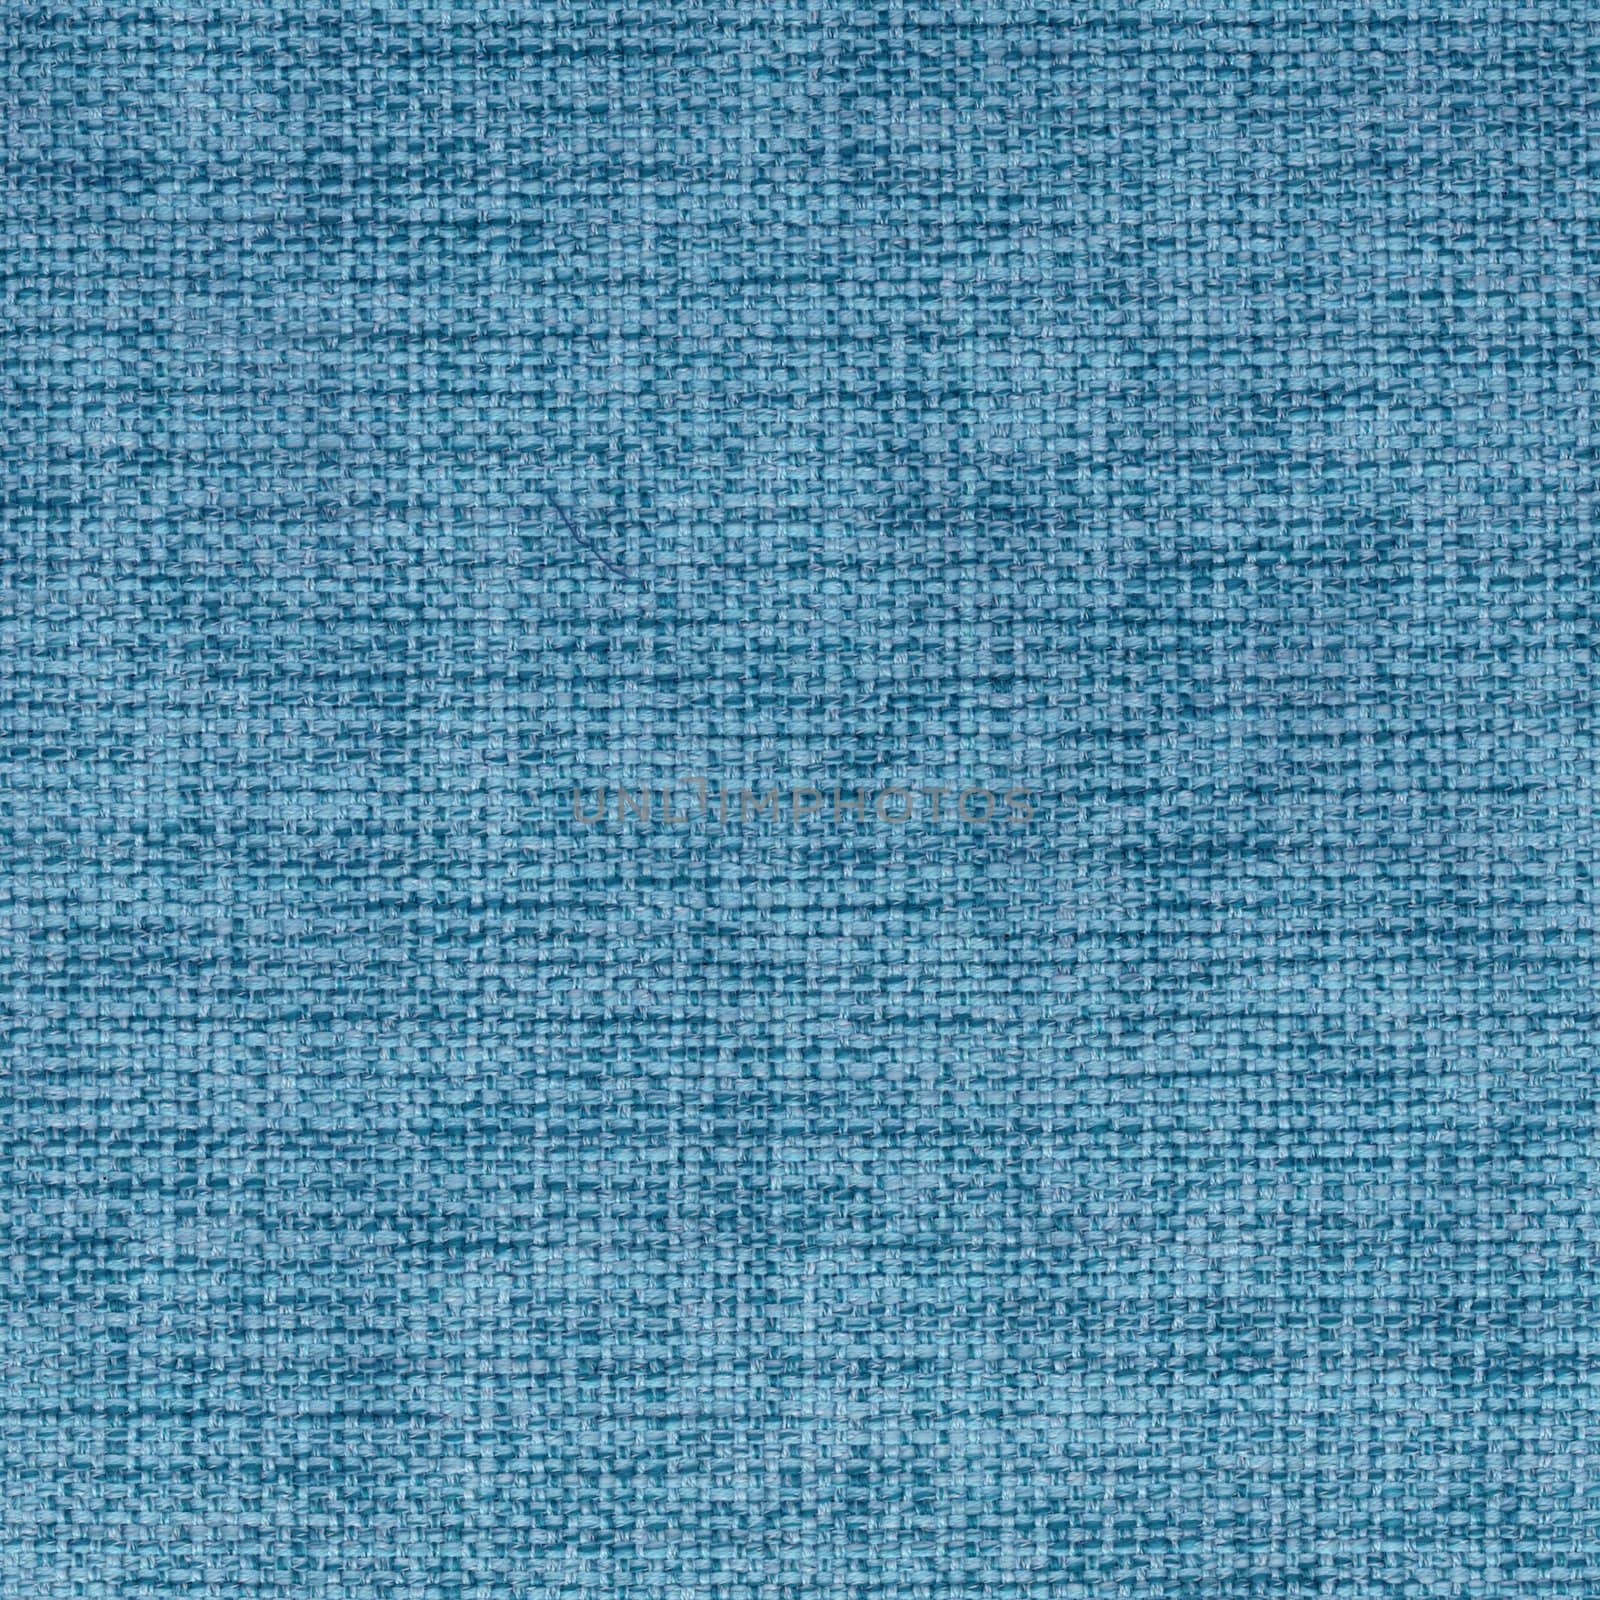 Blue Fabric Texture (High.res.scan) by mg1408